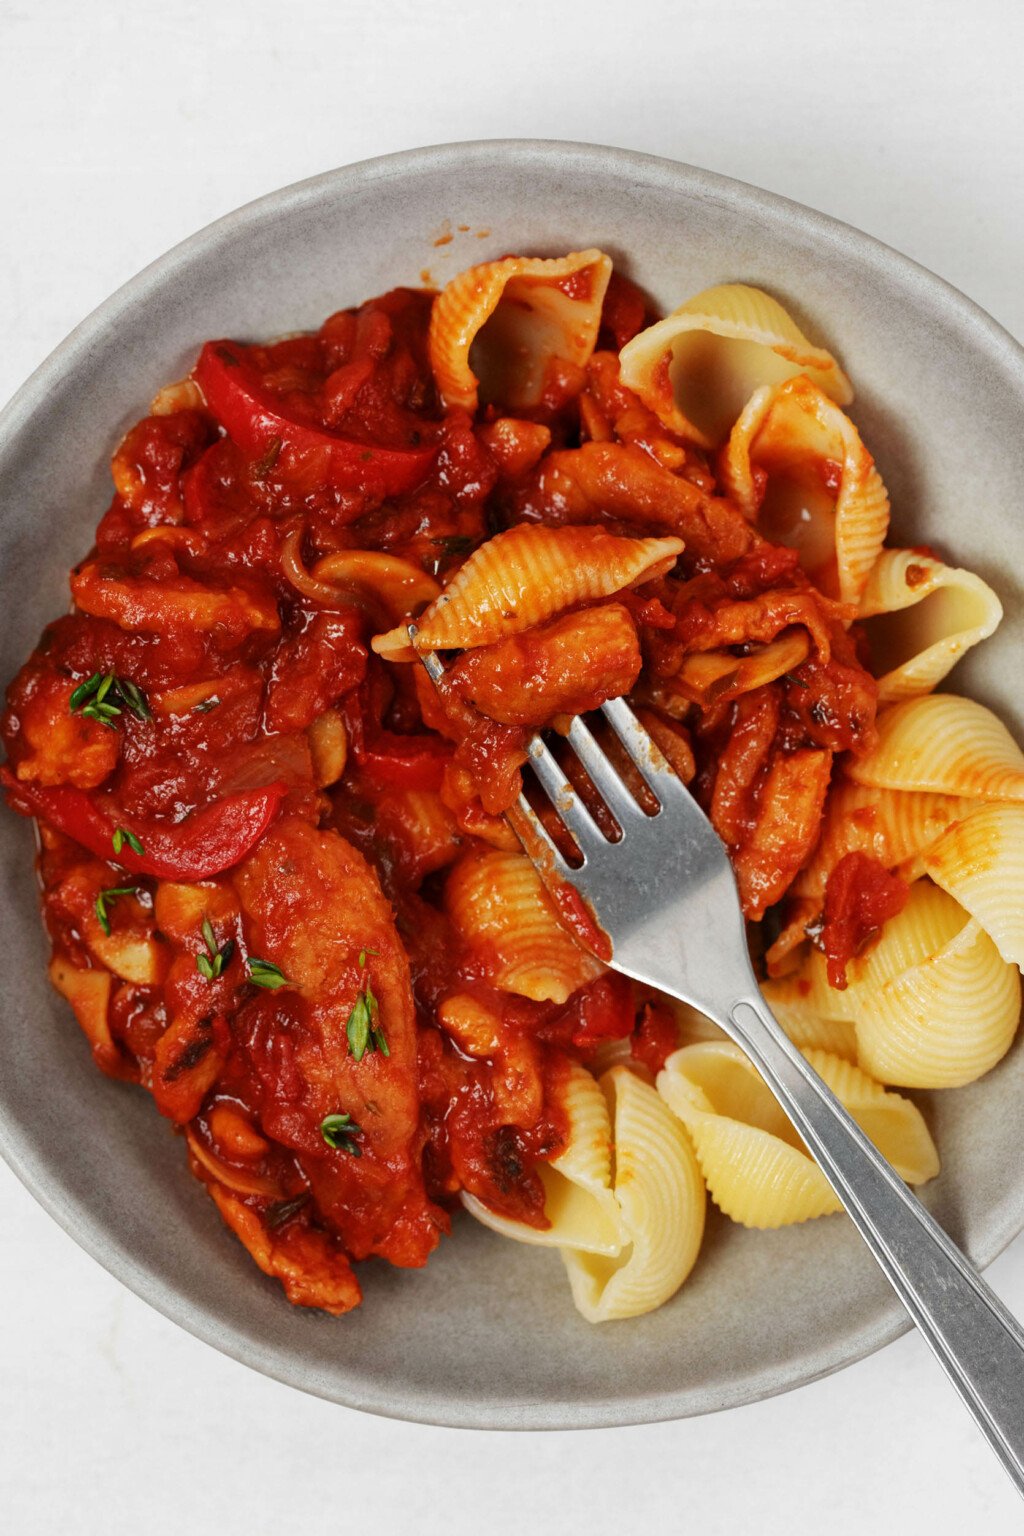 A bowl of shell pasta has been topped with red sauce and a vegan protein.